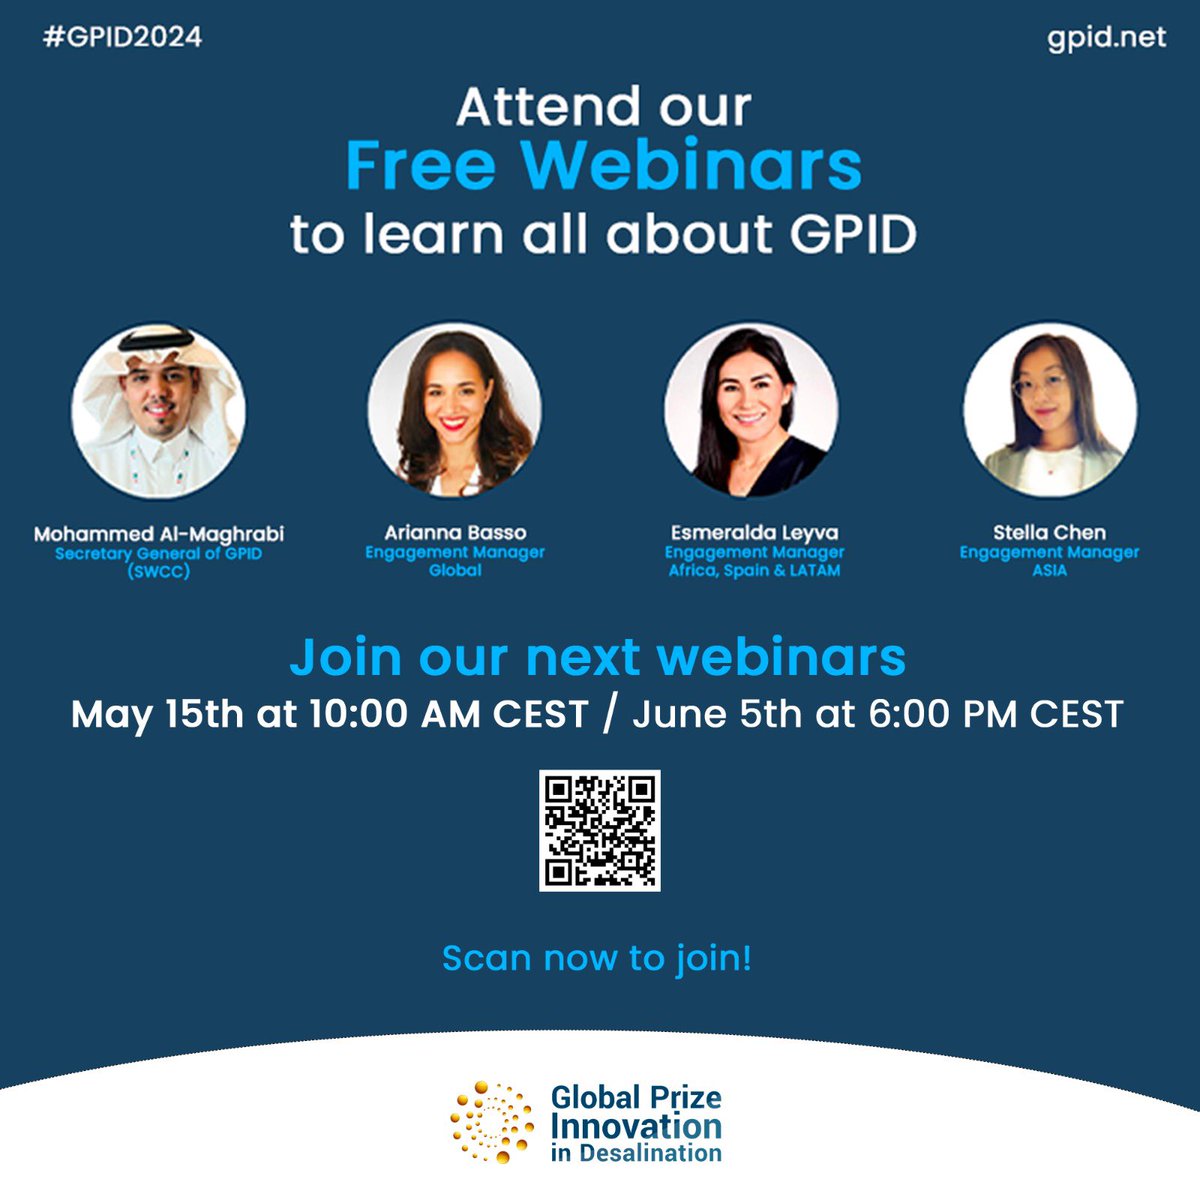 🚀 Excited about the #GPID?
Join our free webinars to get all the insights you need before the submission deadline! Stay tuned for the special guests reveal...🌟

Scan the QR code or click here 👉 gpid.net/webinar/ to register and secure your spot!

#Water #Desalination